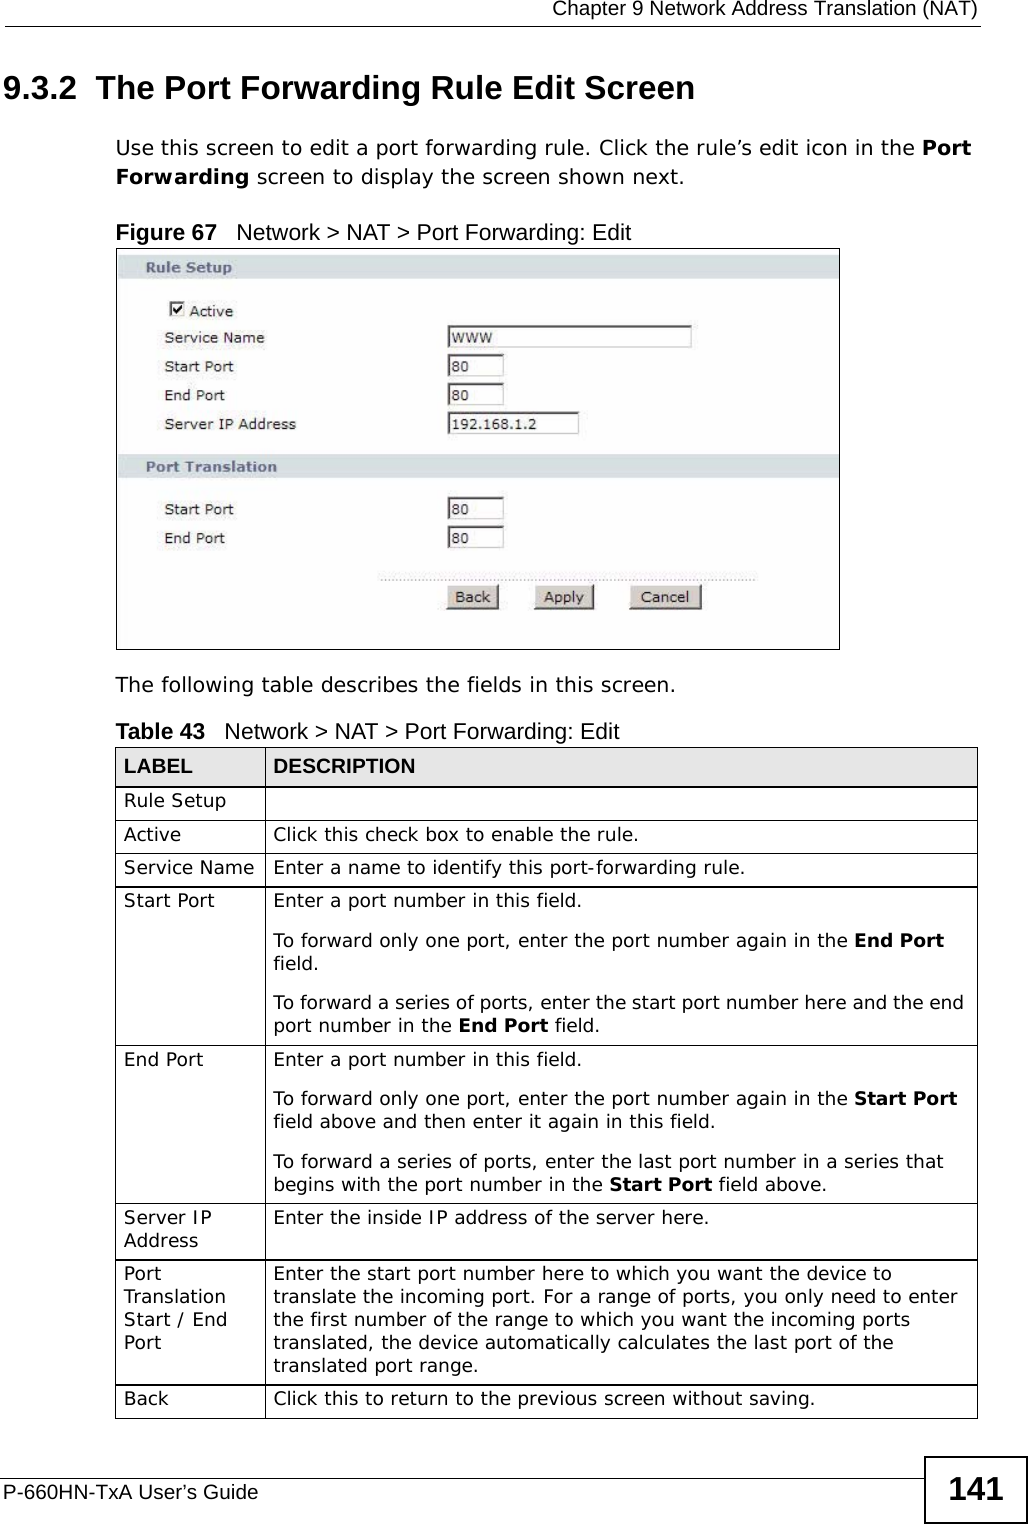  Chapter 9 Network Address Translation (NAT)P-660HN-TxA User’s Guide 1419.3.2  The Port Forwarding Rule Edit ScreenUse this screen to edit a port forwarding rule. Click the rule’s edit icon in the Port Forwarding screen to display the screen shown next.Figure 67   Network &gt; NAT &gt; Port Forwarding: Edit The following table describes the fields in this screen.Table 43   Network &gt; NAT &gt; Port Forwarding: Edit LABEL DESCRIPTIONRule SetupActive Click this check box to enable the rule.Service Name Enter a name to identify this port-forwarding rule.Start Port  Enter a port number in this field. To forward only one port, enter the port number again in the End Port field. To forward a series of ports, enter the start port number here and the end port number in the End Port field.End Port  Enter a port number in this field. To forward only one port, enter the port number again in the Start Port field above and then enter it again in this field. To forward a series of ports, enter the last port number in a series that begins with the port number in the Start Port field above.Server IP Address Enter the inside IP address of the server here.Port Translation Start / End PortEnter the start port number here to which you want the device to translate the incoming port. For a range of ports, you only need to enter the first number of the range to which you want the incoming ports translated, the device automatically calculates the last port of the translated port range.Back Click this to return to the previous screen without saving.